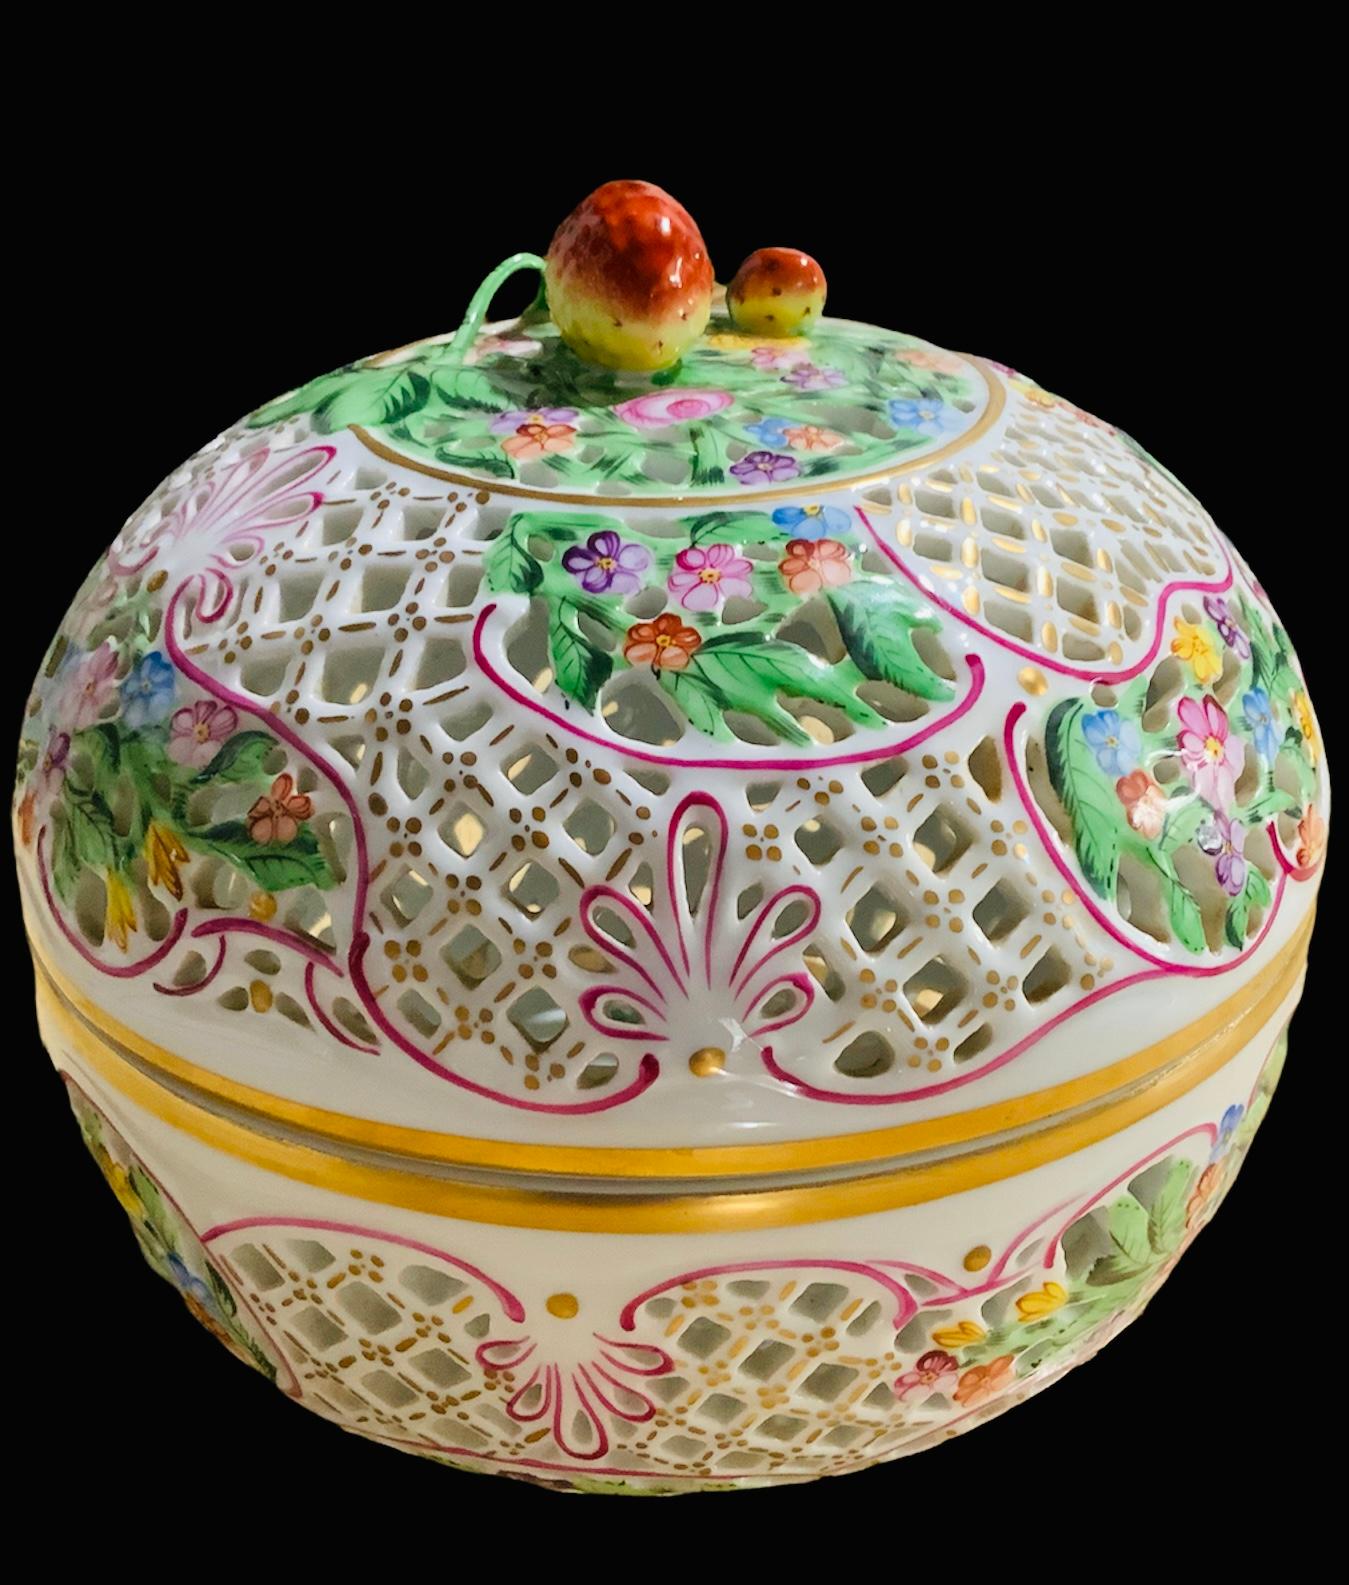 Hungarian Large Herend Porcelain Reticulated Potpourri/ Bombonniere Lidded Box